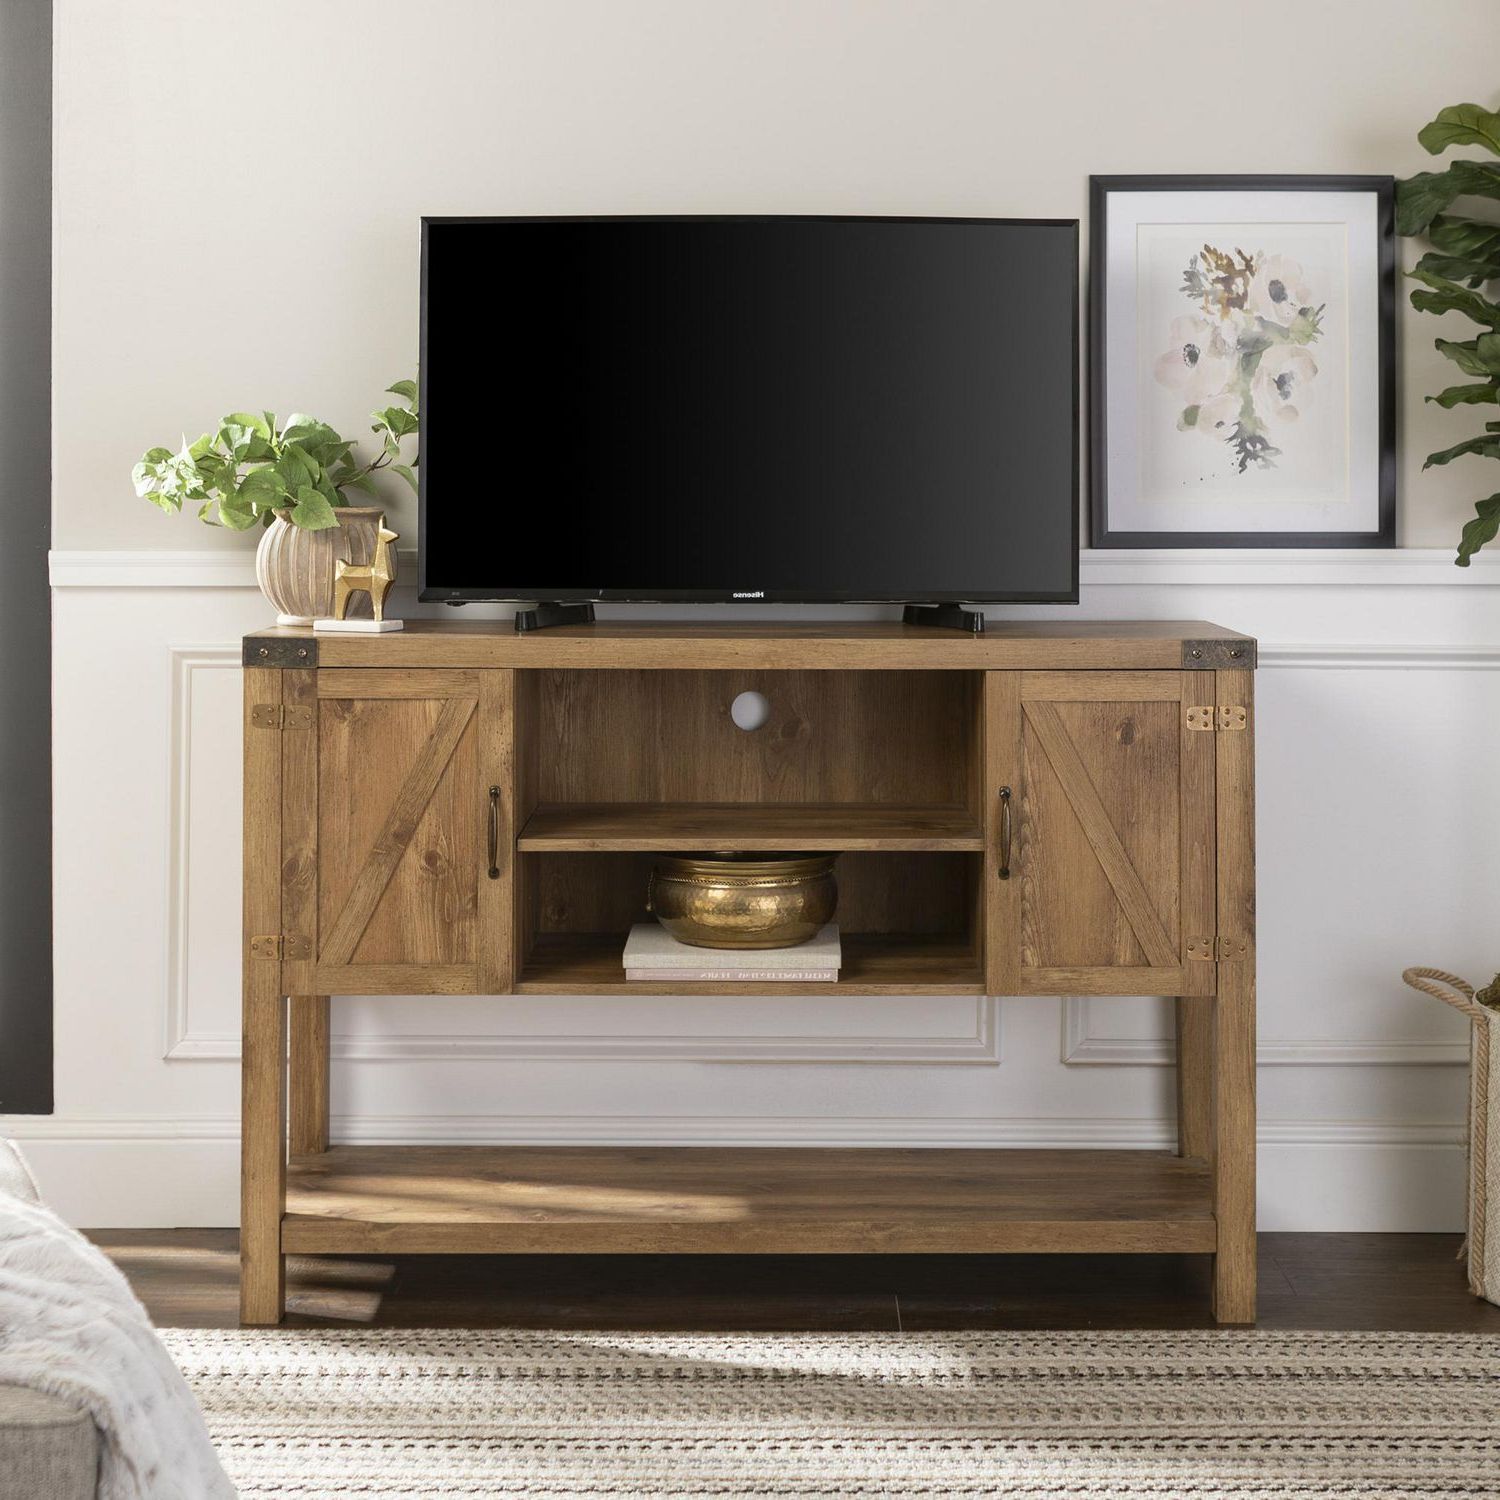 Manor Park Tall Modern Farmhouse Tv Stand For Tv's Up To With Regard To Better Homes &amp; Gardens Modern Farmhouse Tv Stands With Multiple Finishes (Gallery 28 of 31)